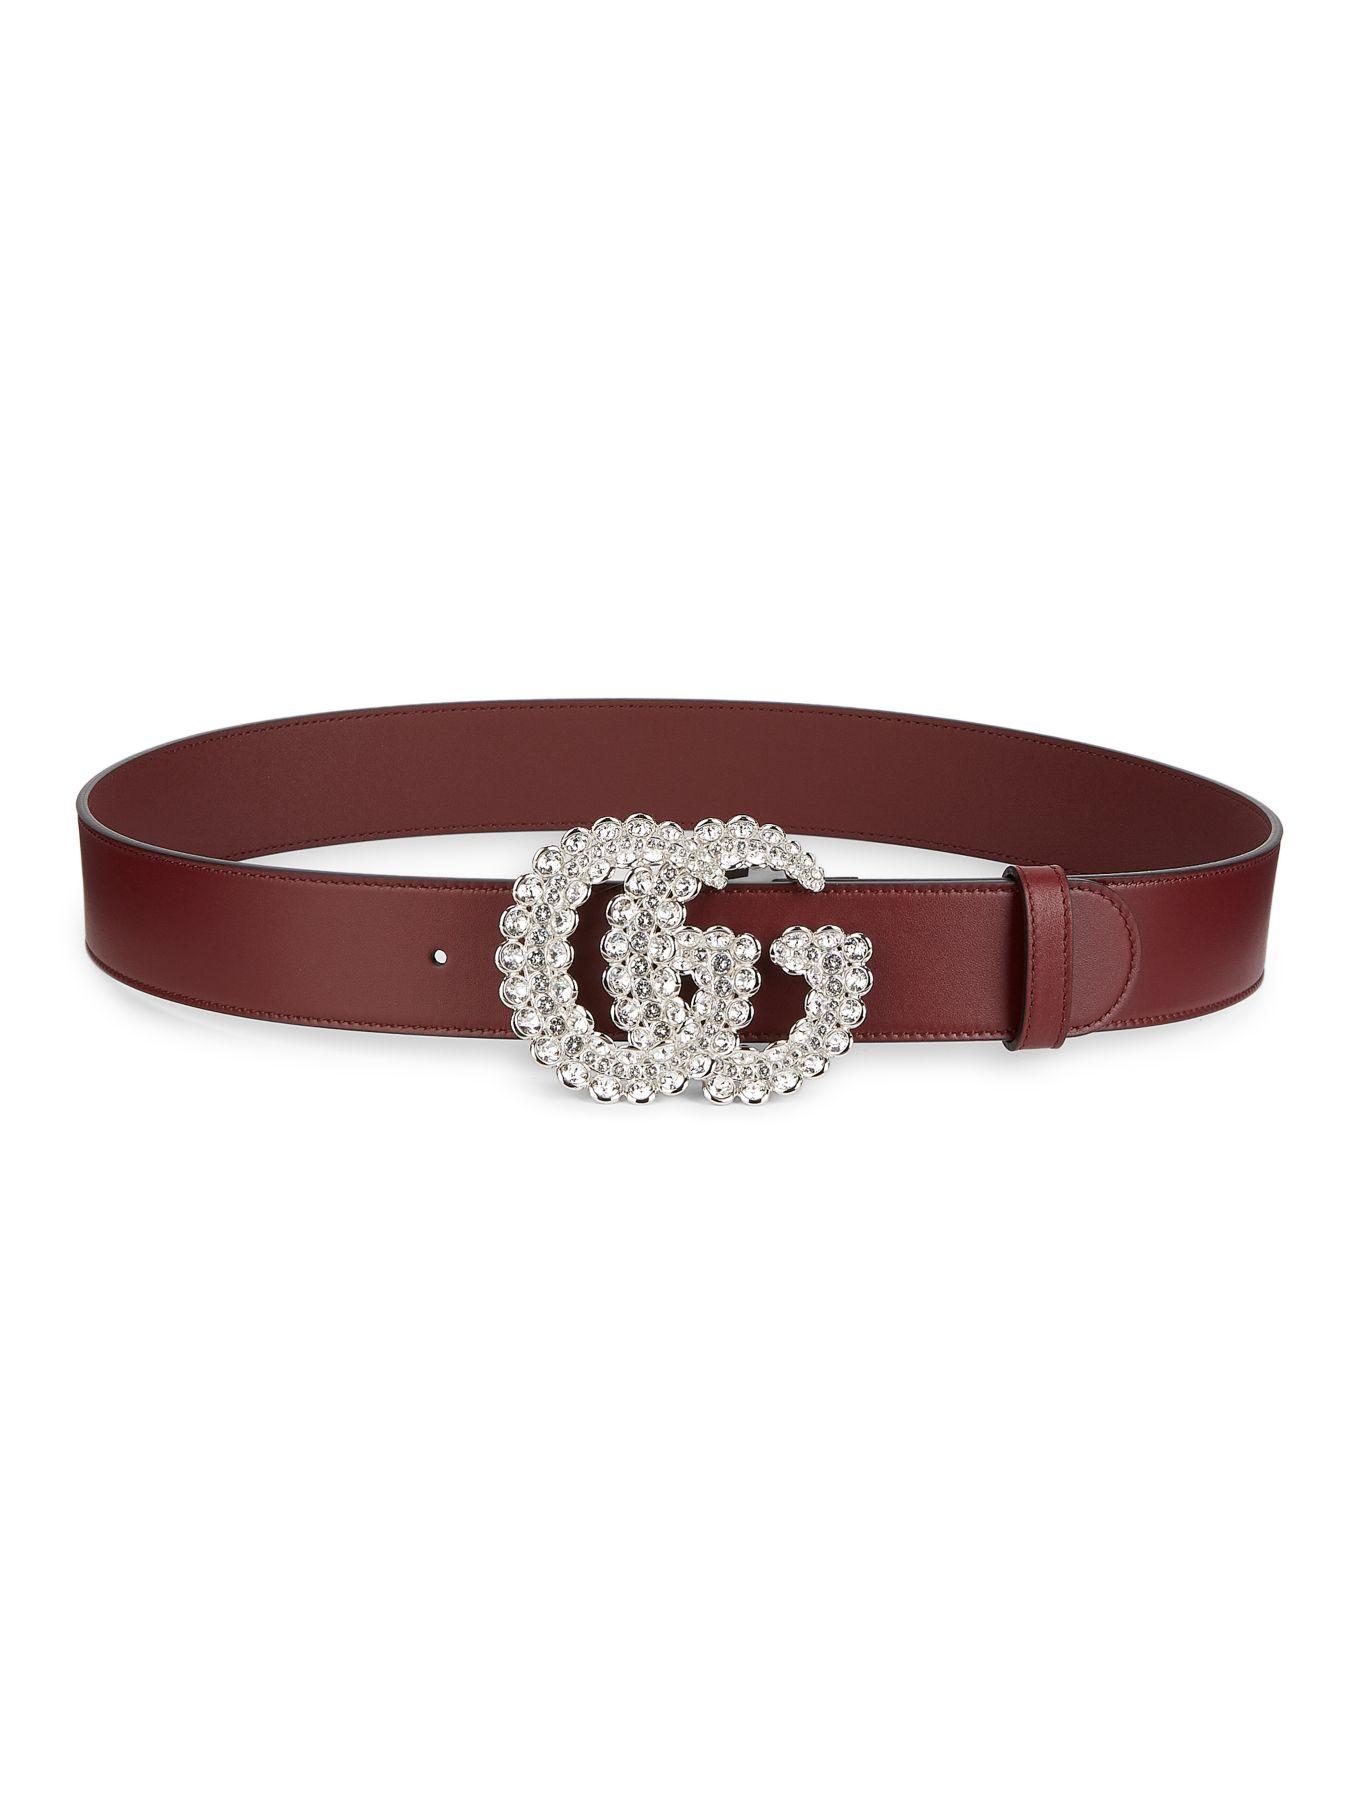 Gucci Leather Belt W/ Double G Crystal Buckle in Bordeaux Crystal (Red) - Lyst